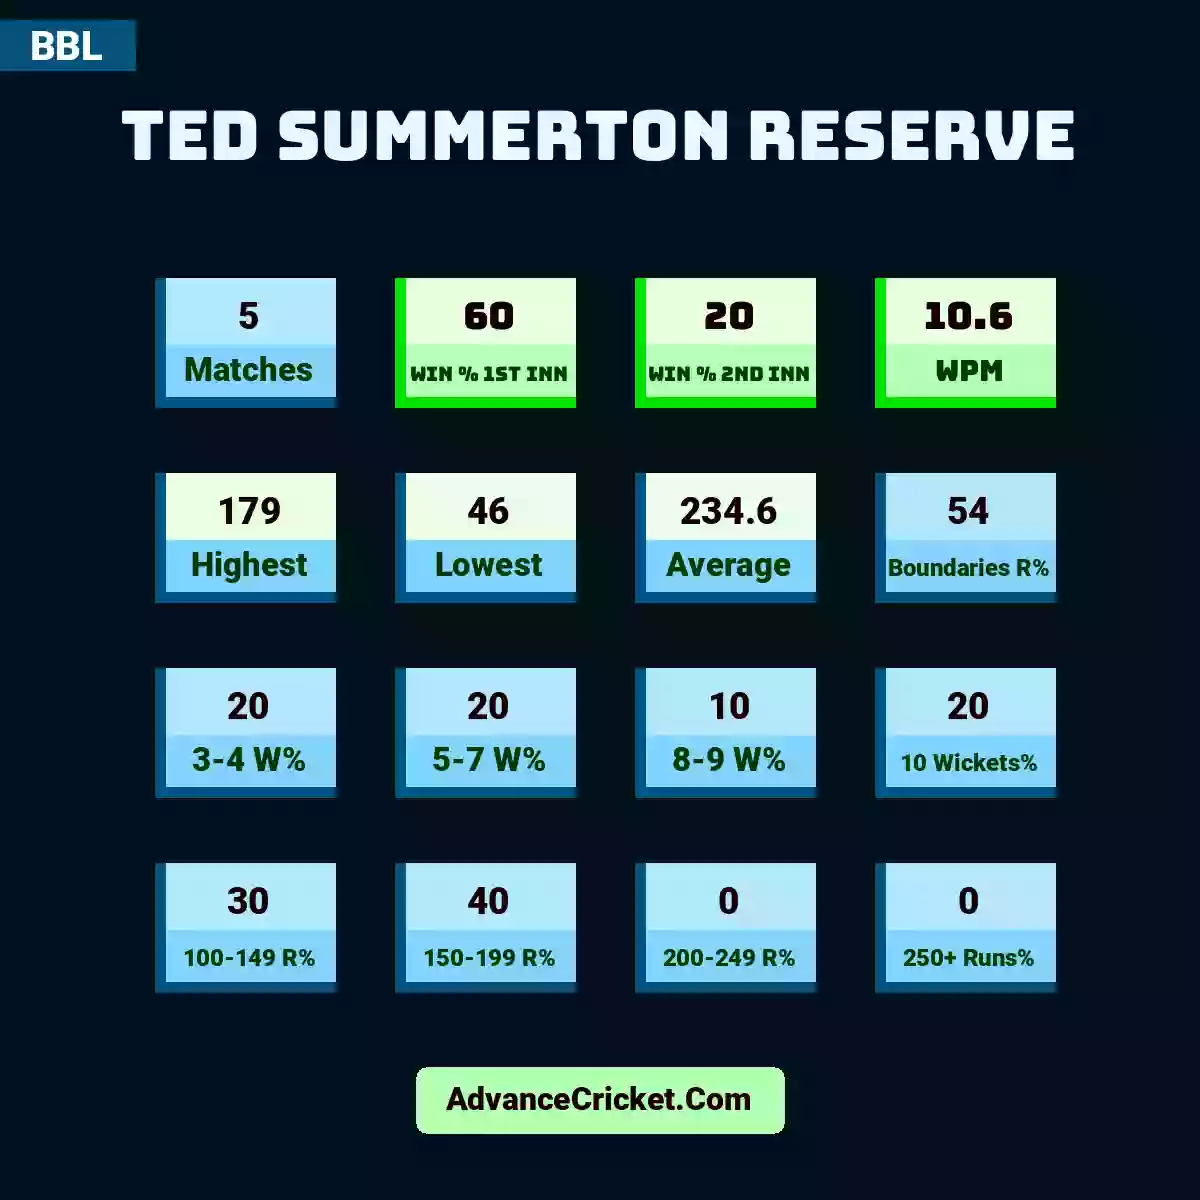 Image showing Ted Summerton Reserve with Matches: 5, Win % 1st Inn: 60, Win % 2nd Inn: 20, WPM: 10.6, Highest: 179, Lowest: 46, Average: 234.6, Boundaries R%: 54, 3-4 W%: 20, 5-7 W%: 20, 8-9 W%: 10, 10 Wickets%: 20, 100-149 R%: 30, 150-199 R%: 40, 200-249 R%: 0, 250+ Runs%: 0.